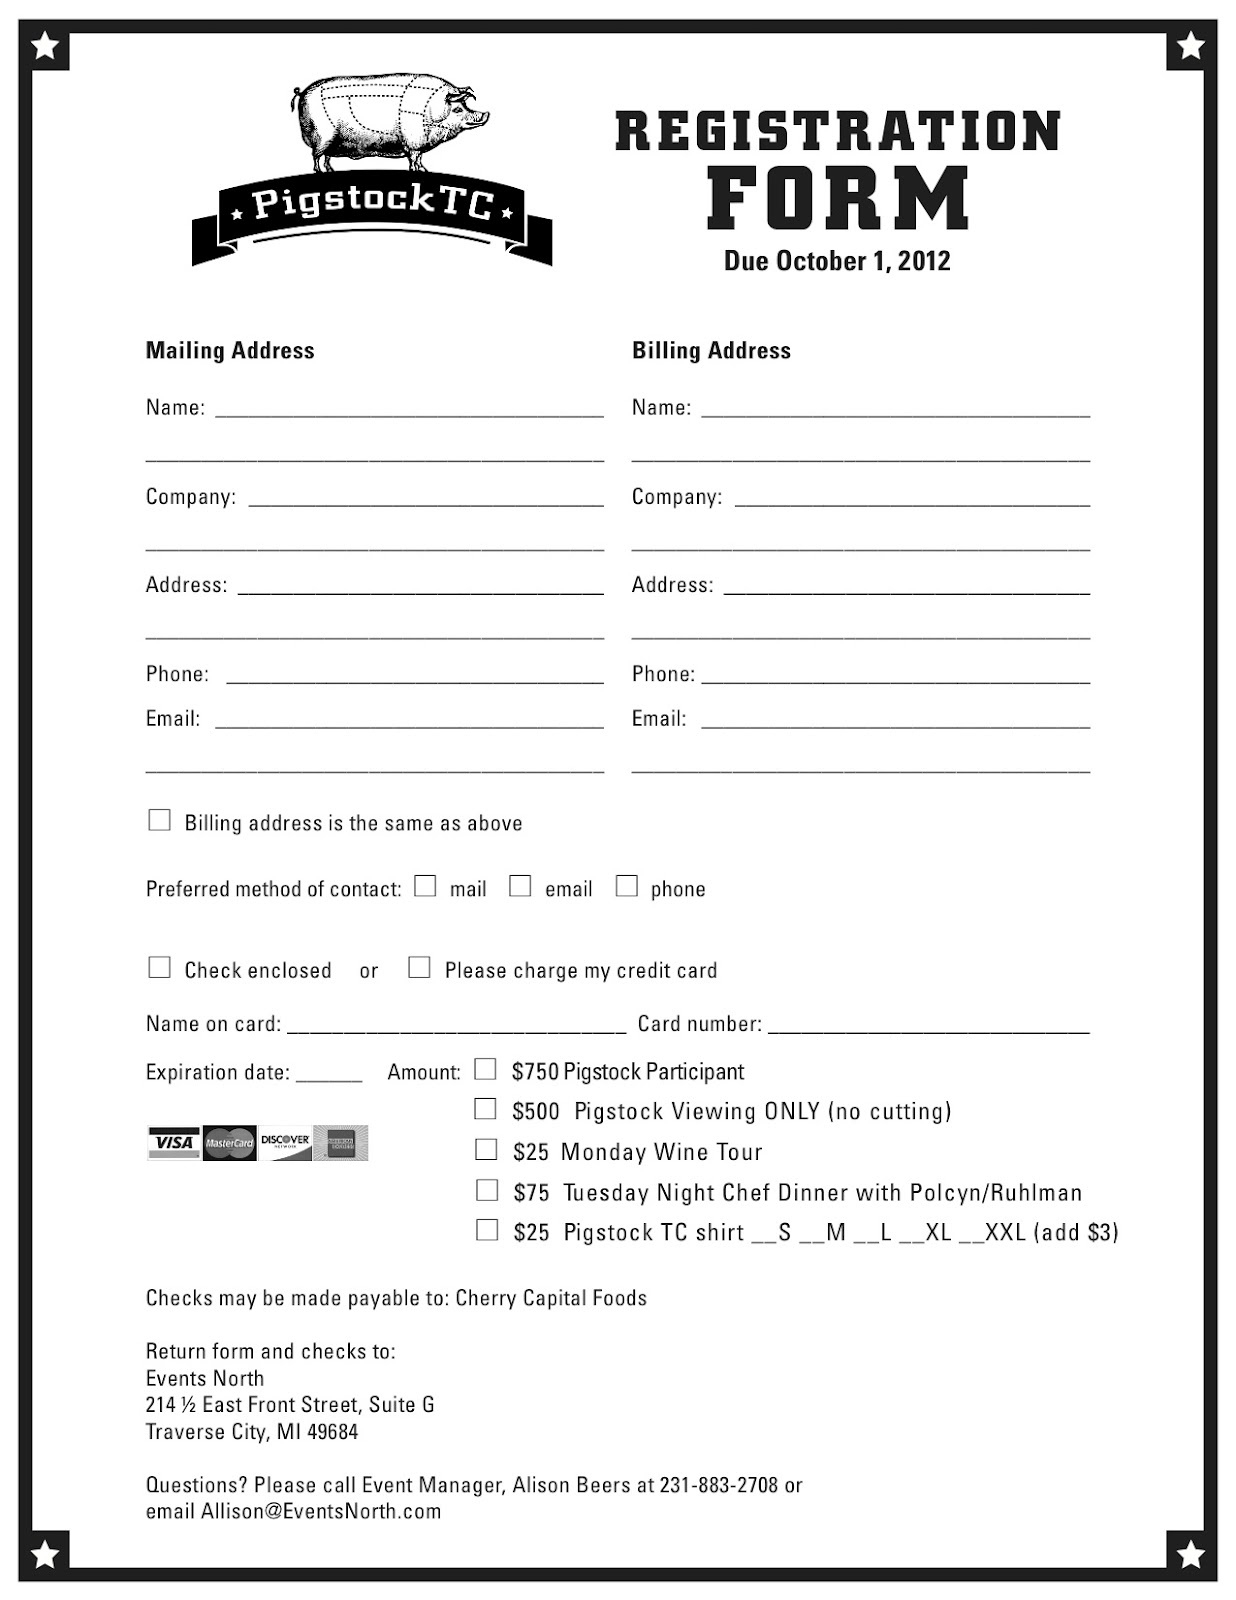 Register Form Template Free Download - Yeniscale.co  Free Download Blank Summer Camp Application